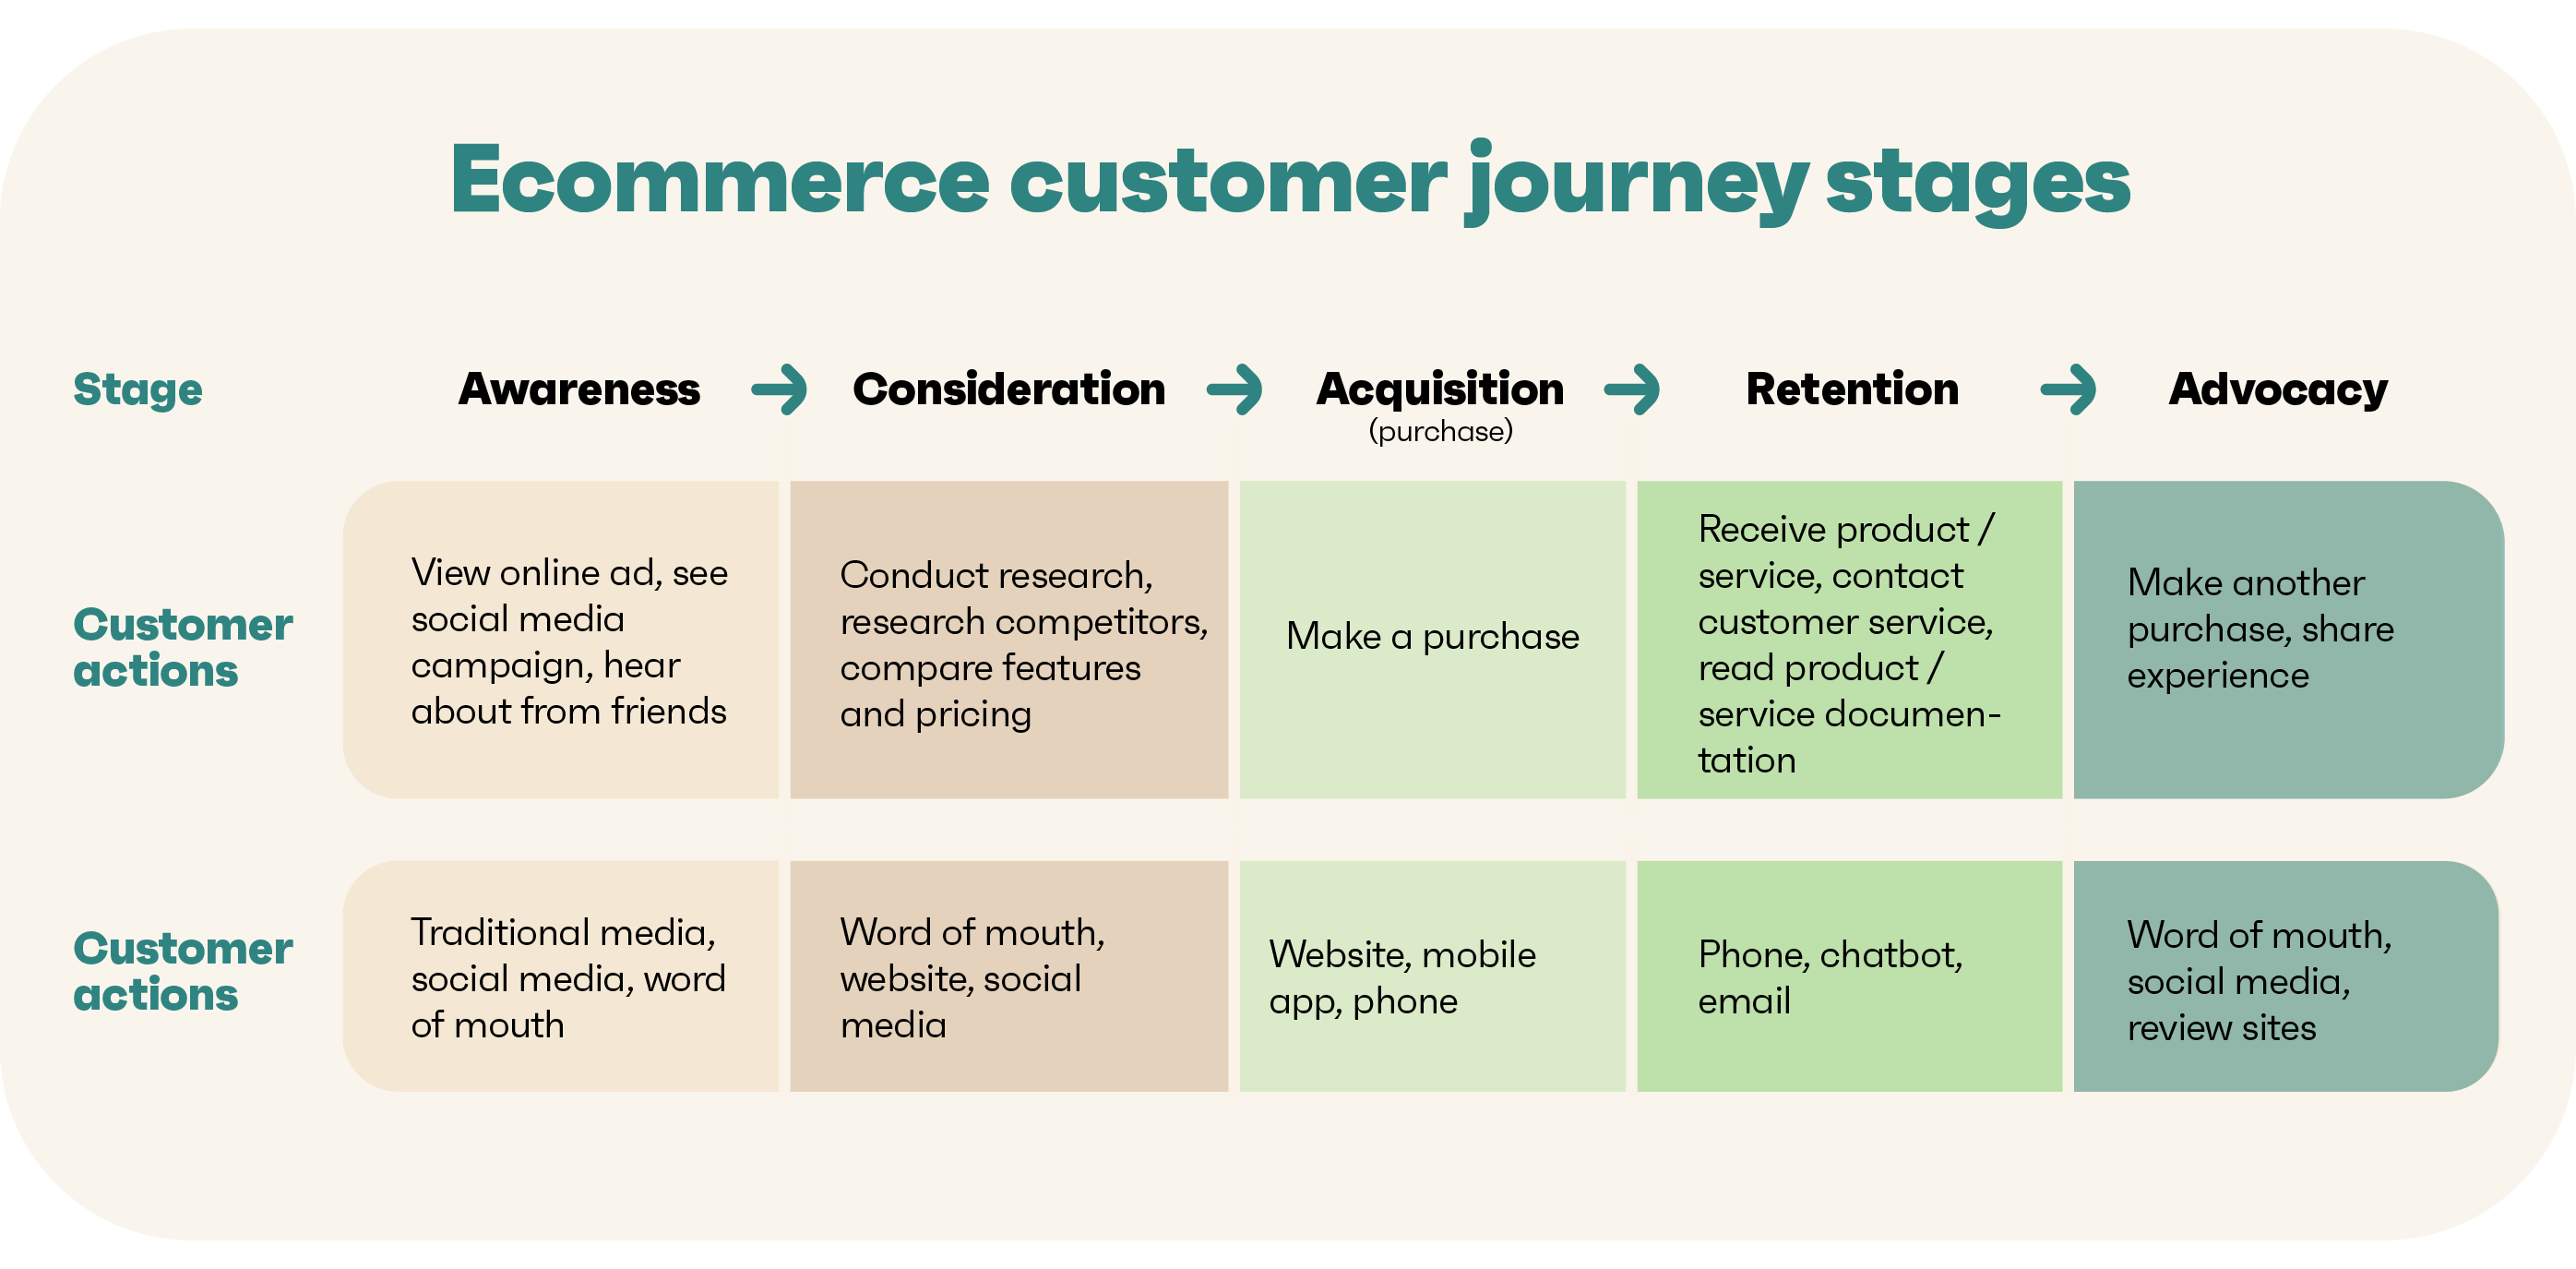 05 31 Ecommerce Customer Journey Customer Journey Stages Transforming Your Online Store: The Art of E-commerce Website Redesign for Higher Conversions and Customer Engagement Vizion Interactive